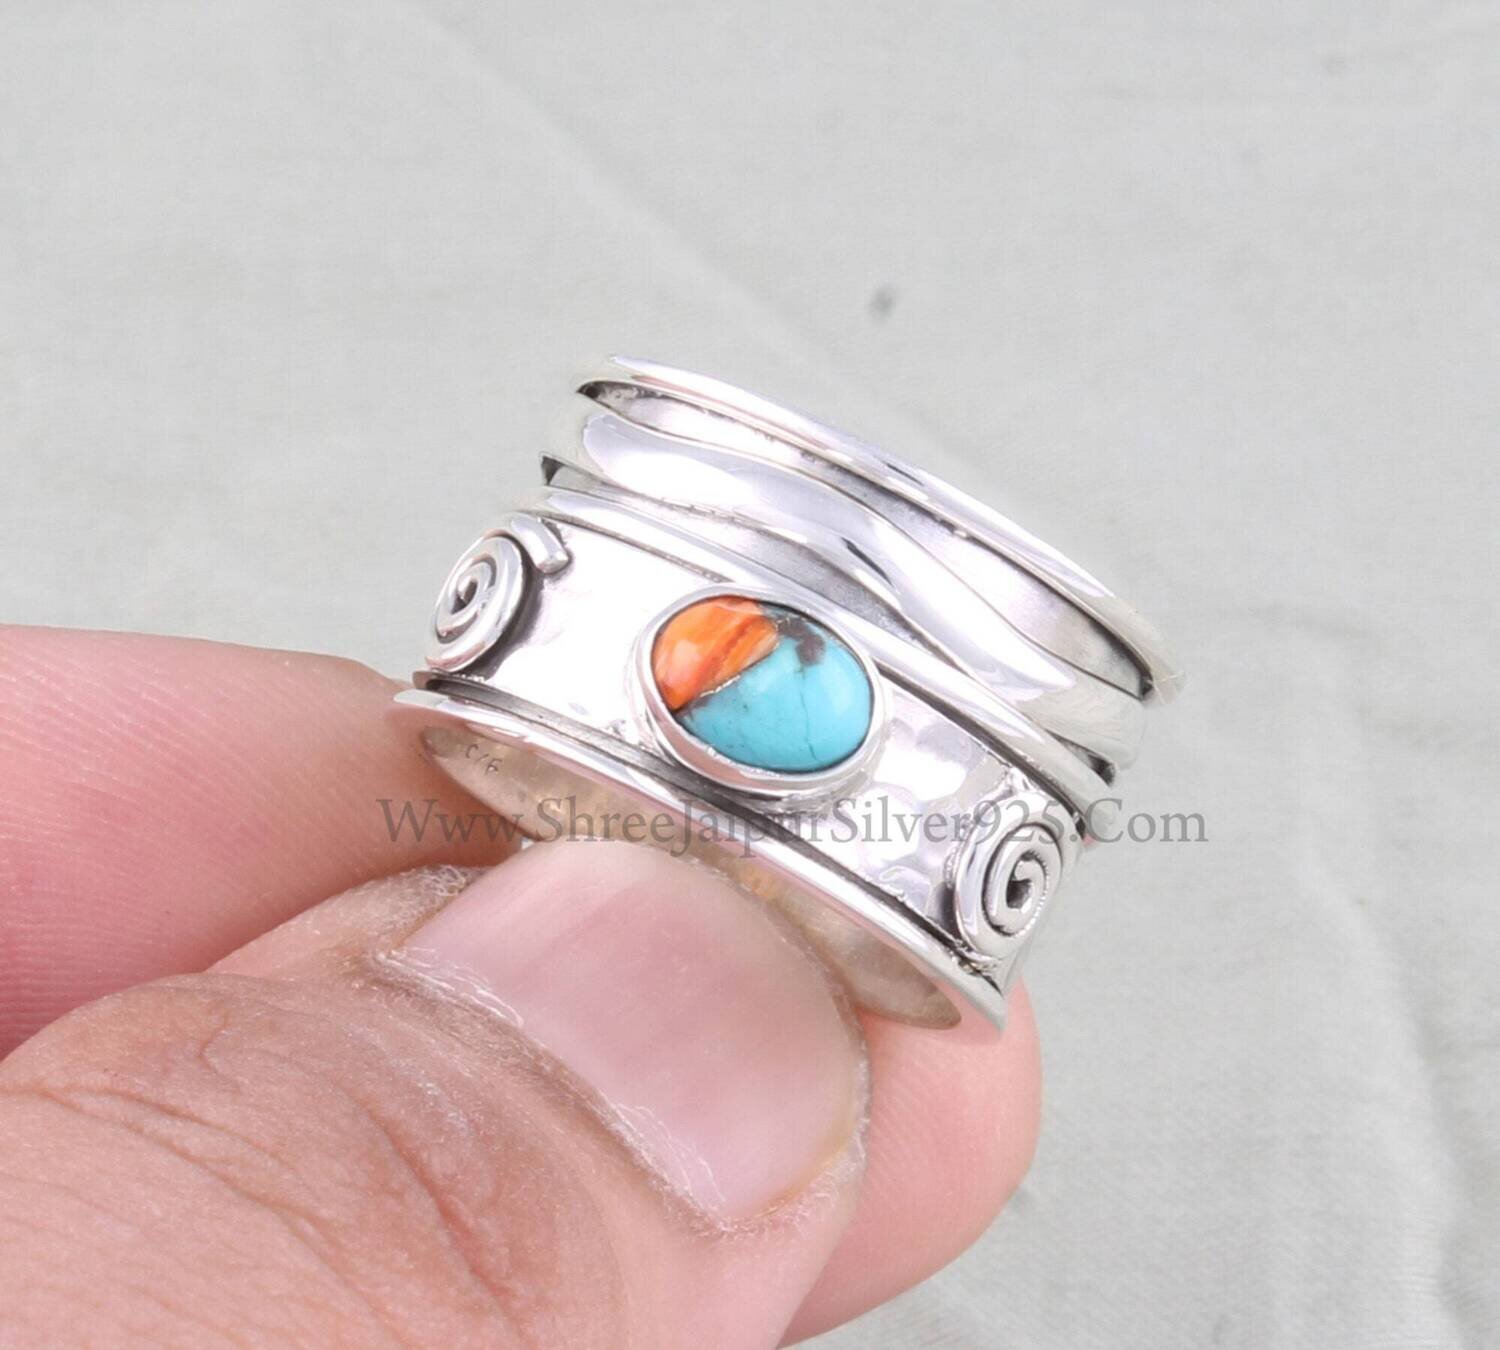 Oyster Copper Turquoise Solid 925 Sterling Silver Spinner Ring For Women, Handmade Wave Spiral Band Ring For Wedding Anniversary Gift Idea